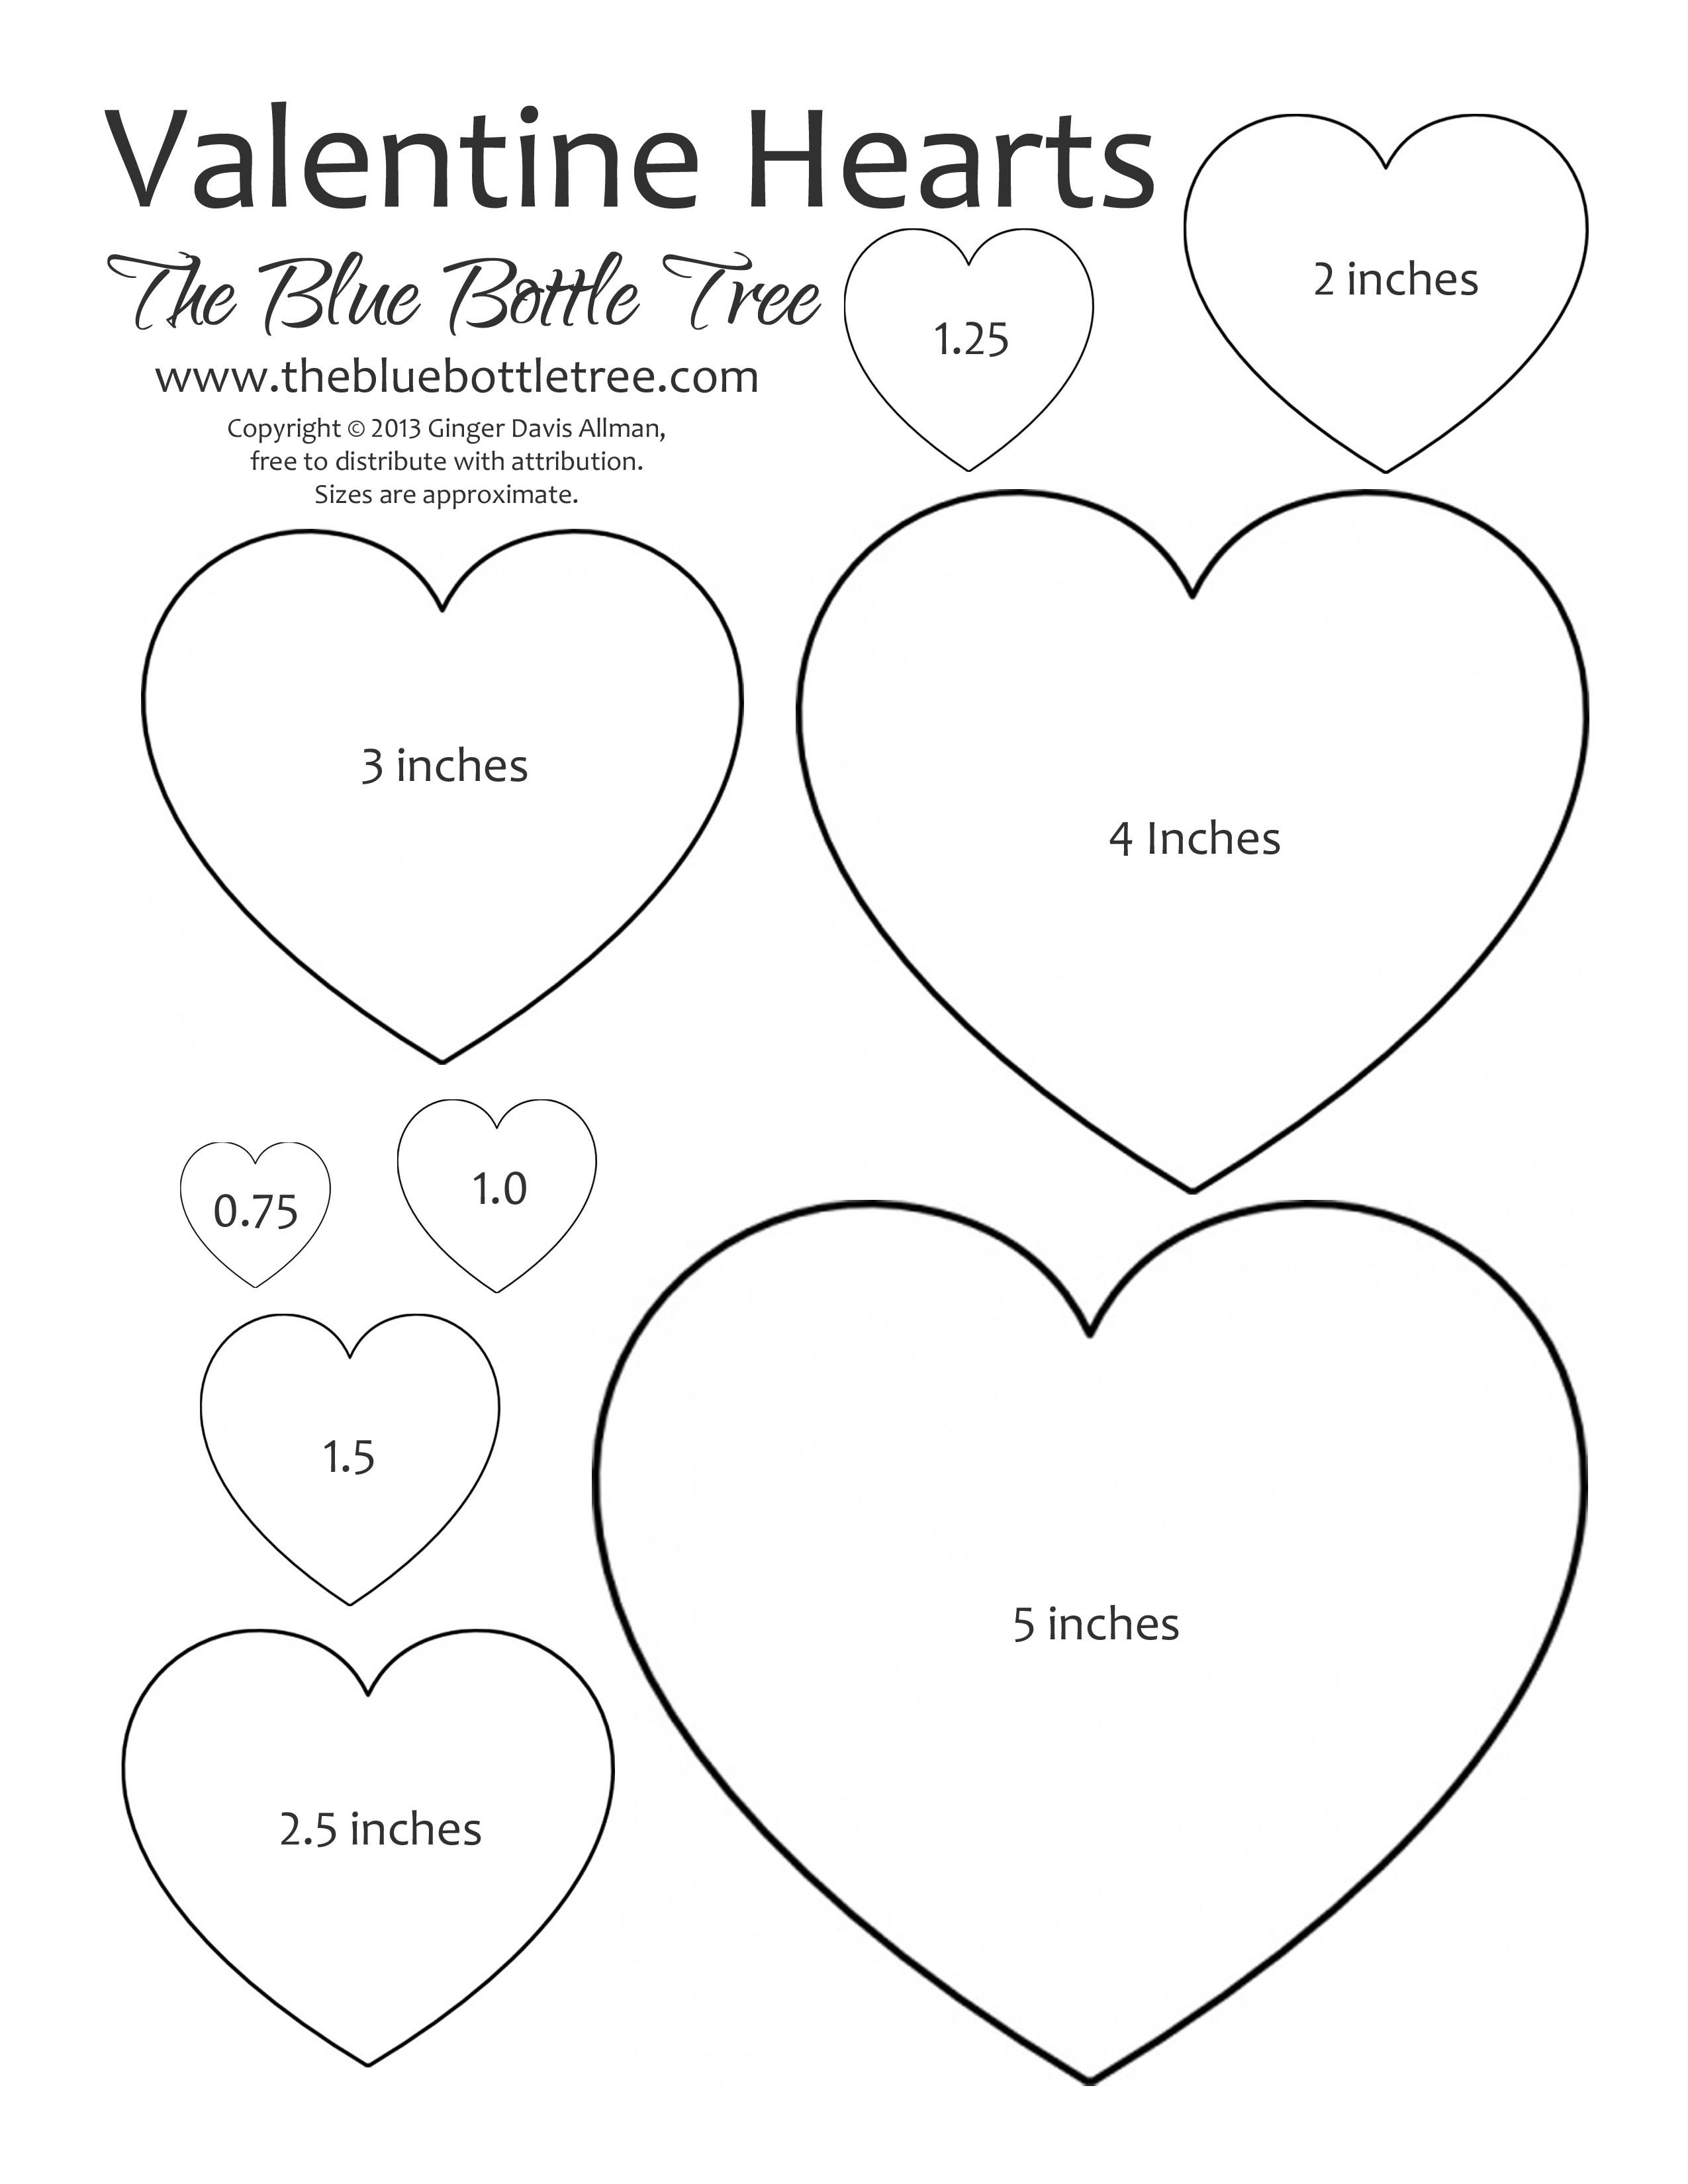 Valentine Heart Printable Clipart | Crafting Tips And Tricks - Free Printable Valentine Heart Patterns